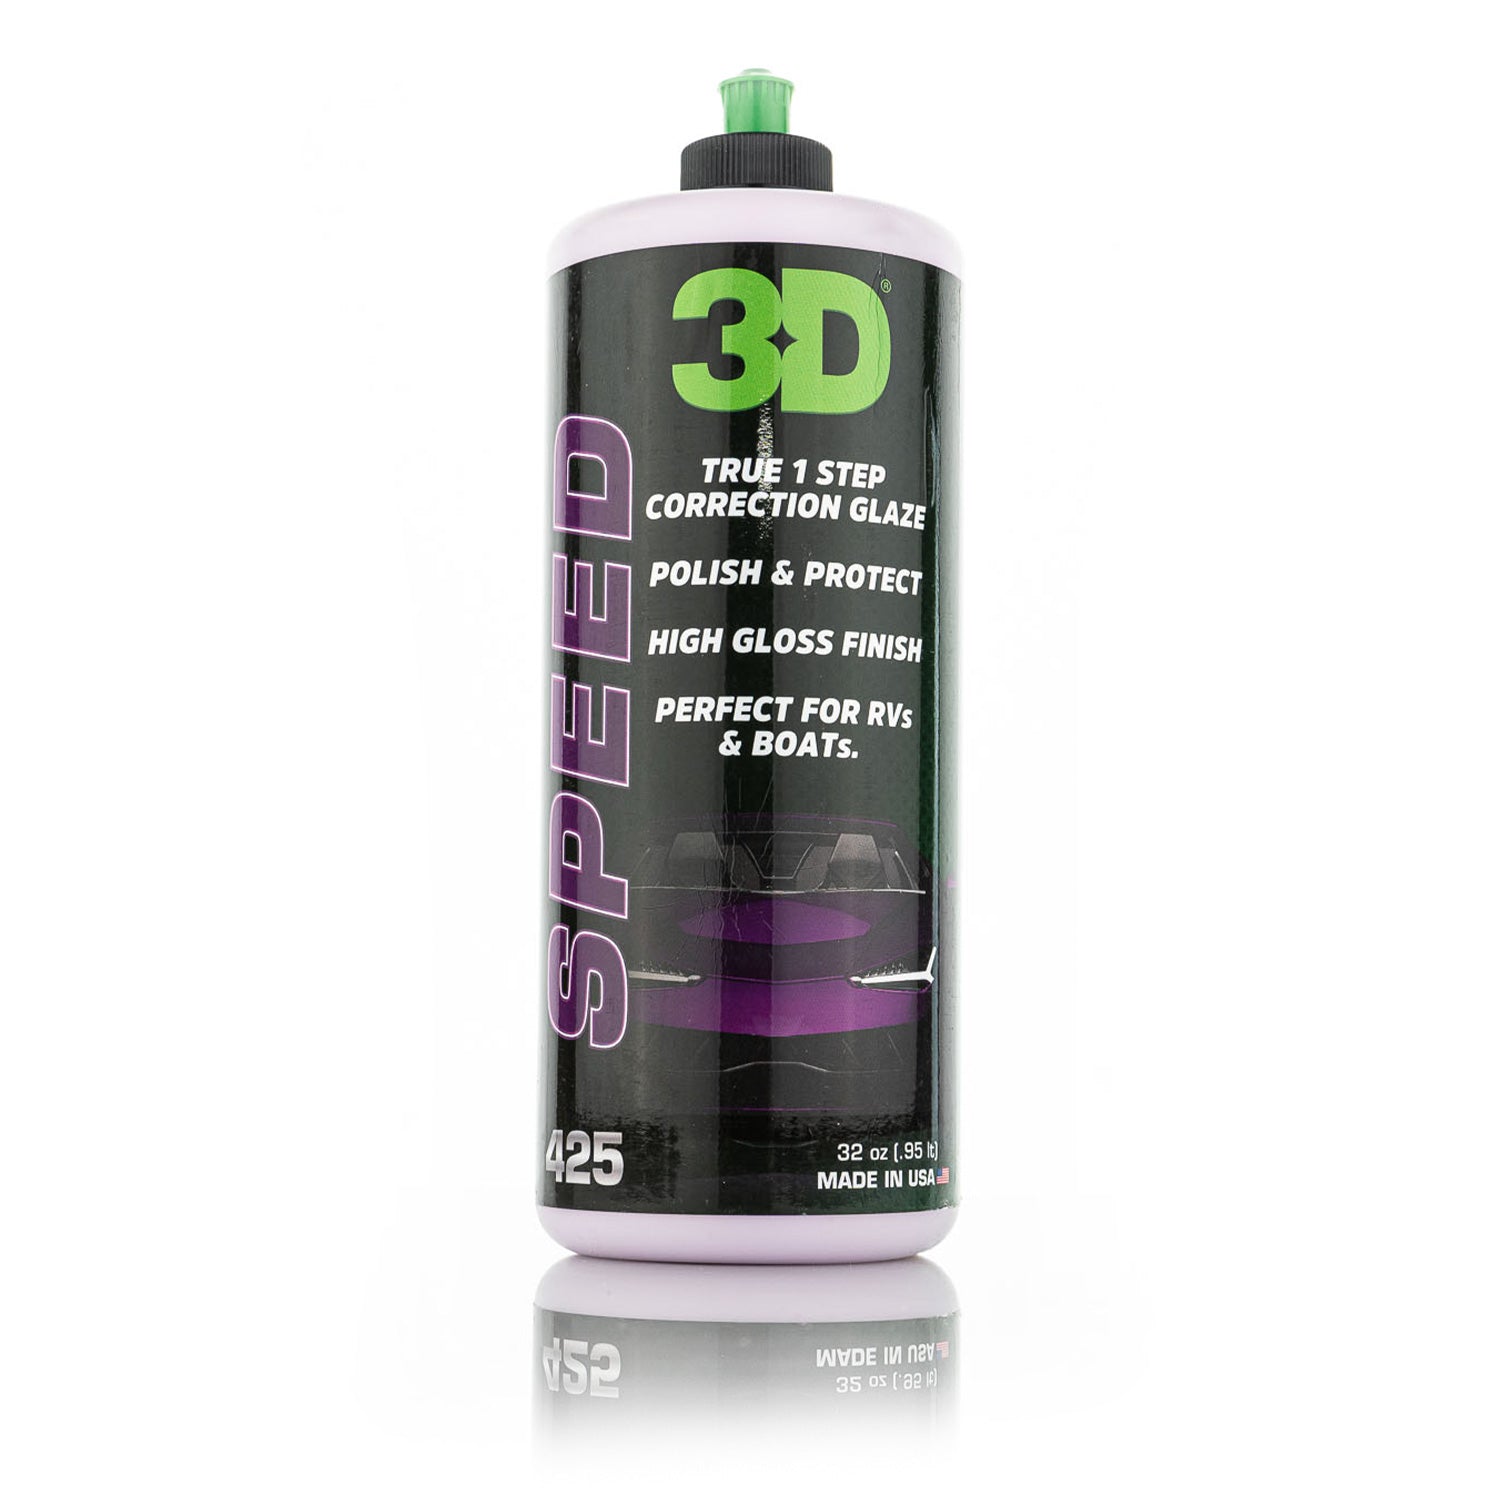 3D i-Cut Industrial Cutting Compound - Fast Cutting Industrial Grade Rubbing Compound (Great for Fast-Paced High Volume Shops 32oz)